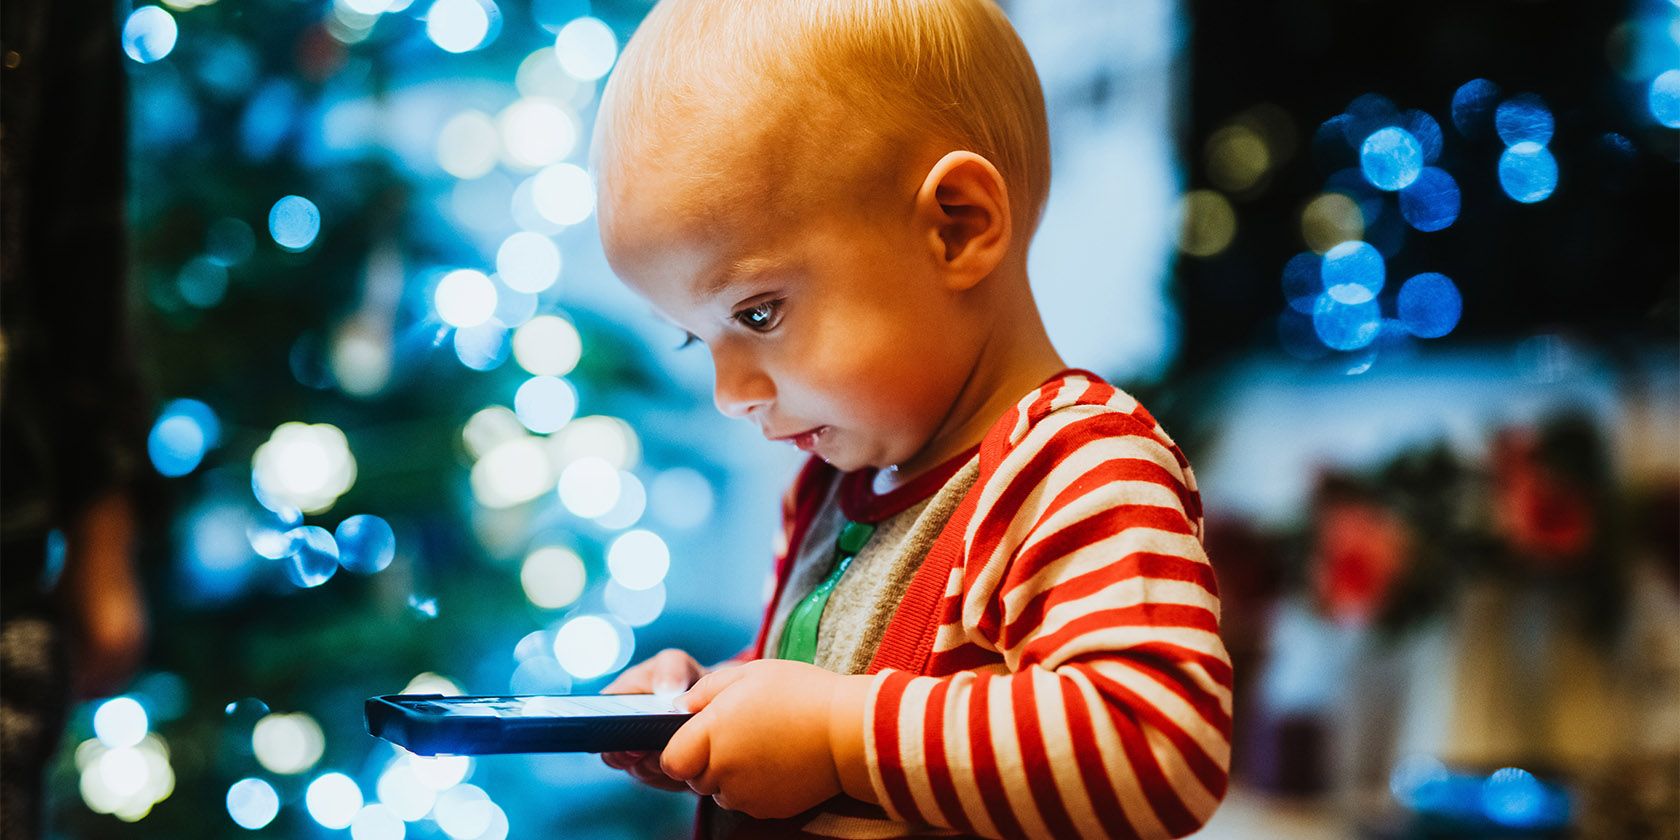 child looking at phone during christmas